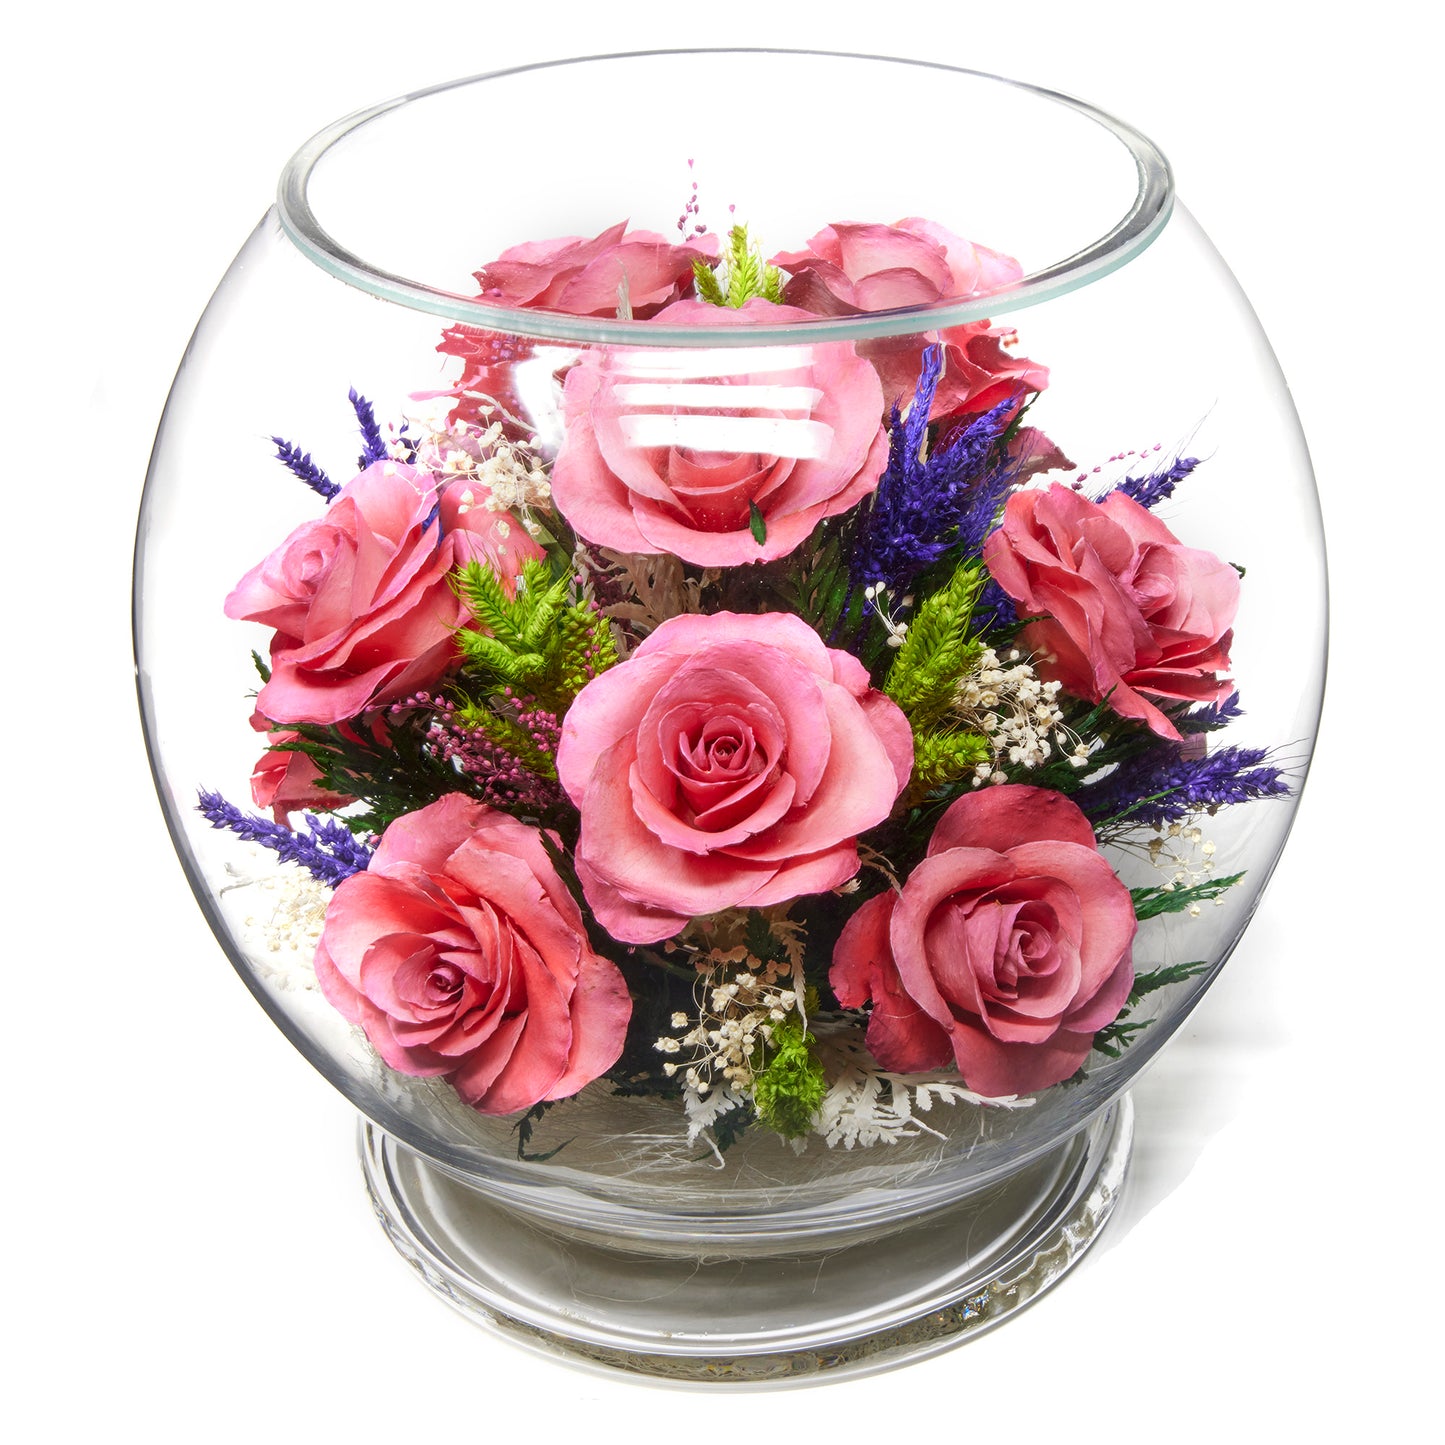 In Flores Veritas: Pink Petal Pedestal Bowl - Lasts up to 5 Years - Elegant Gift for Any Occasion